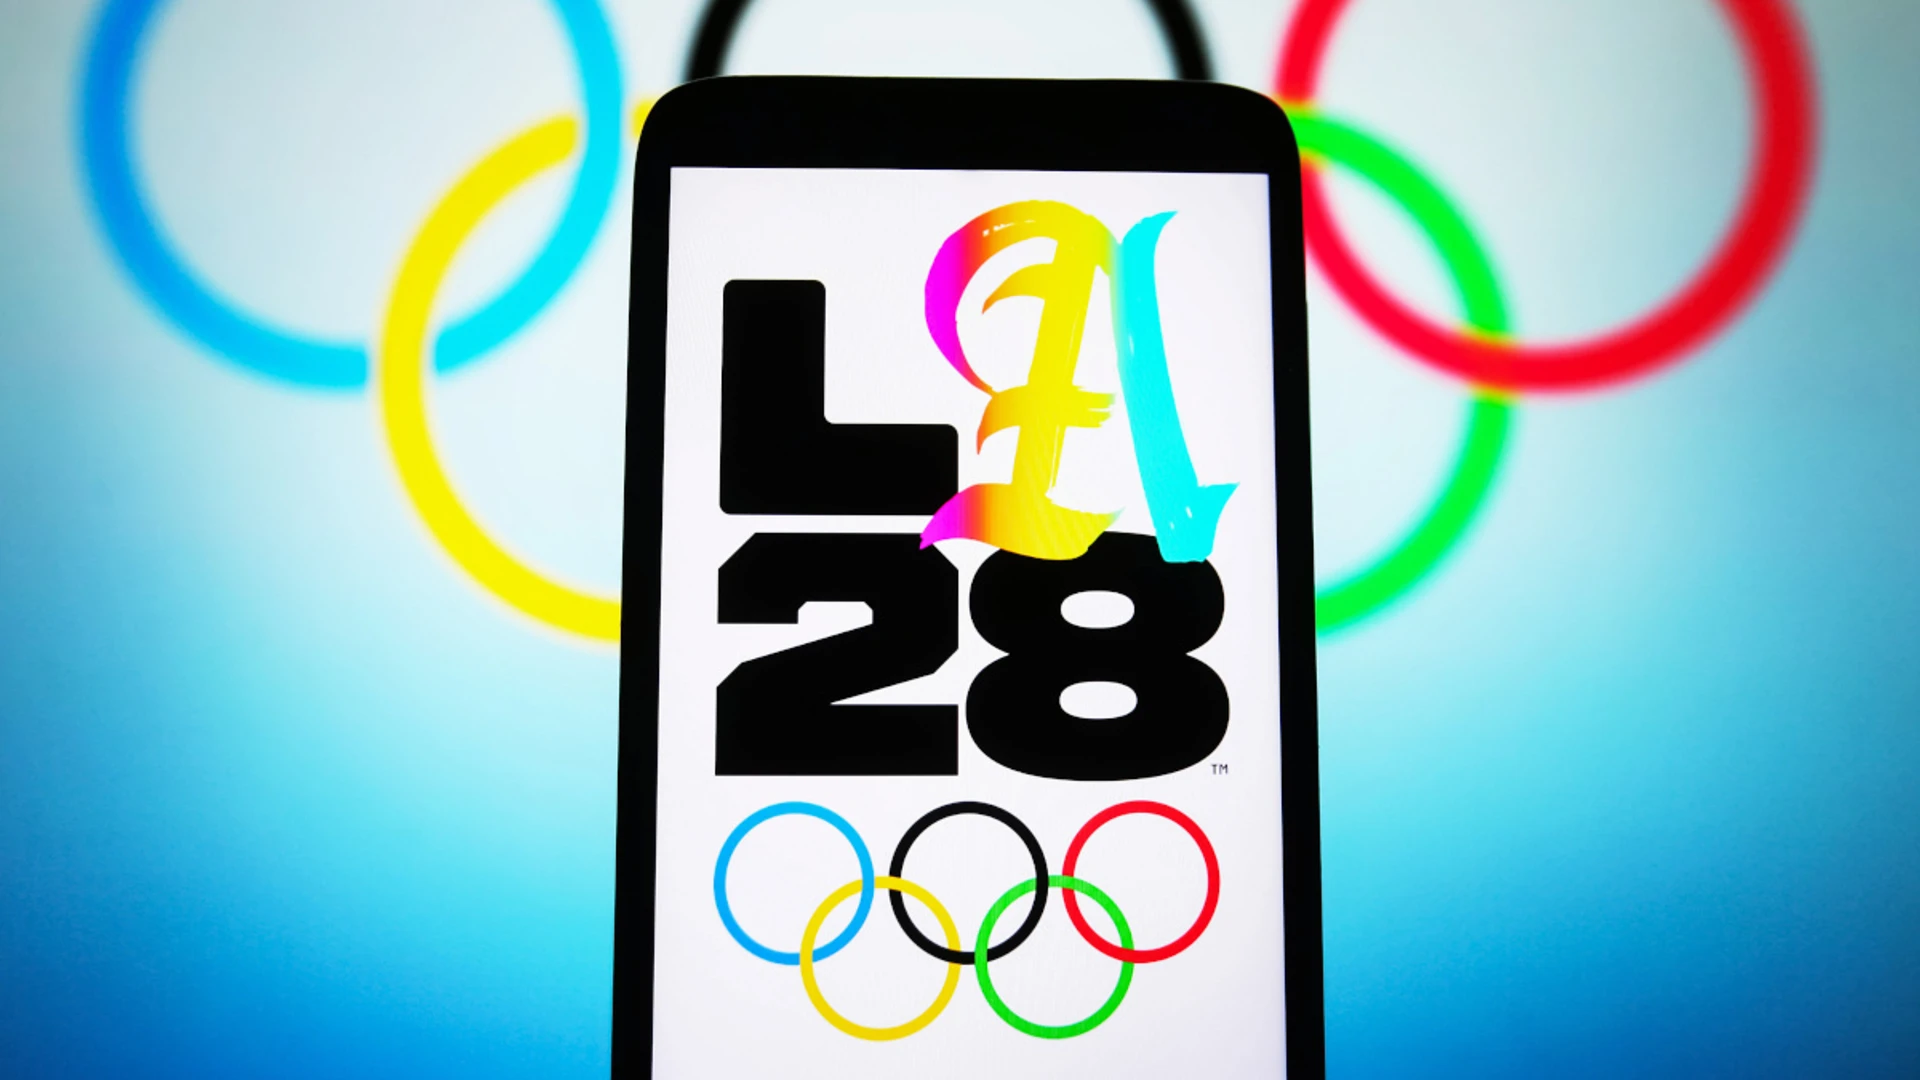 Los Angeles 2028 organisers announce schedule, venue shake-up